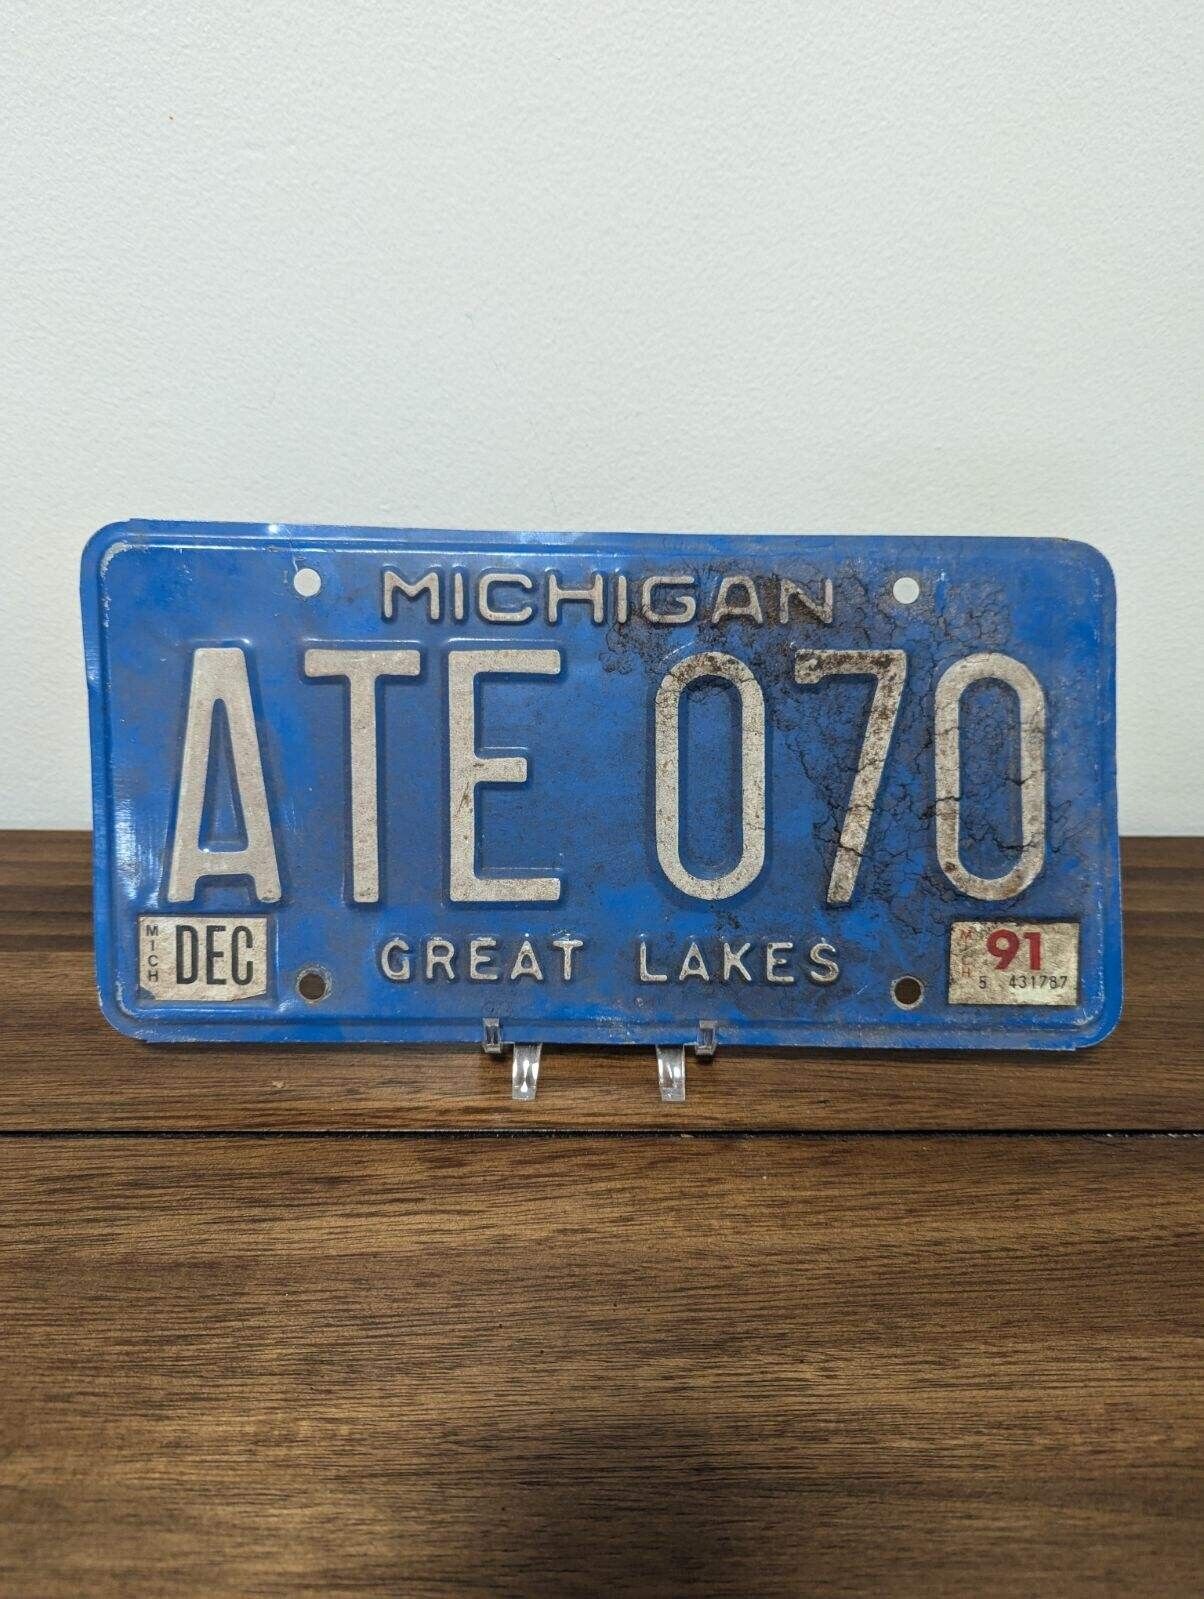 1991 Michigan License Plate Great Lakes Blue #ATE070